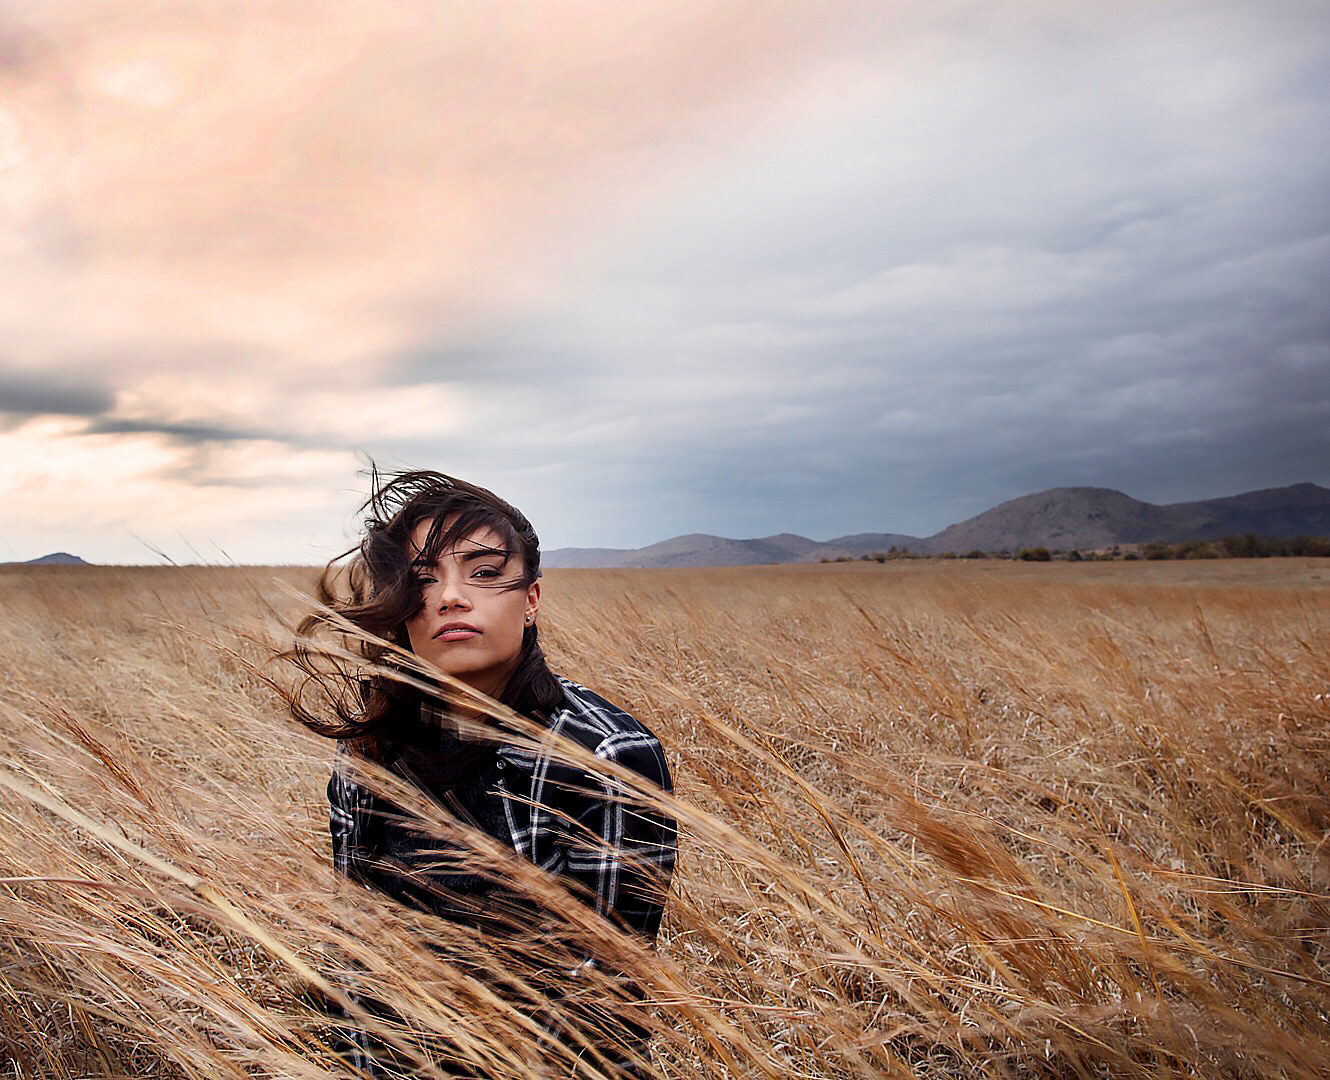 A women with windswept hair in a field under a cloudy sky